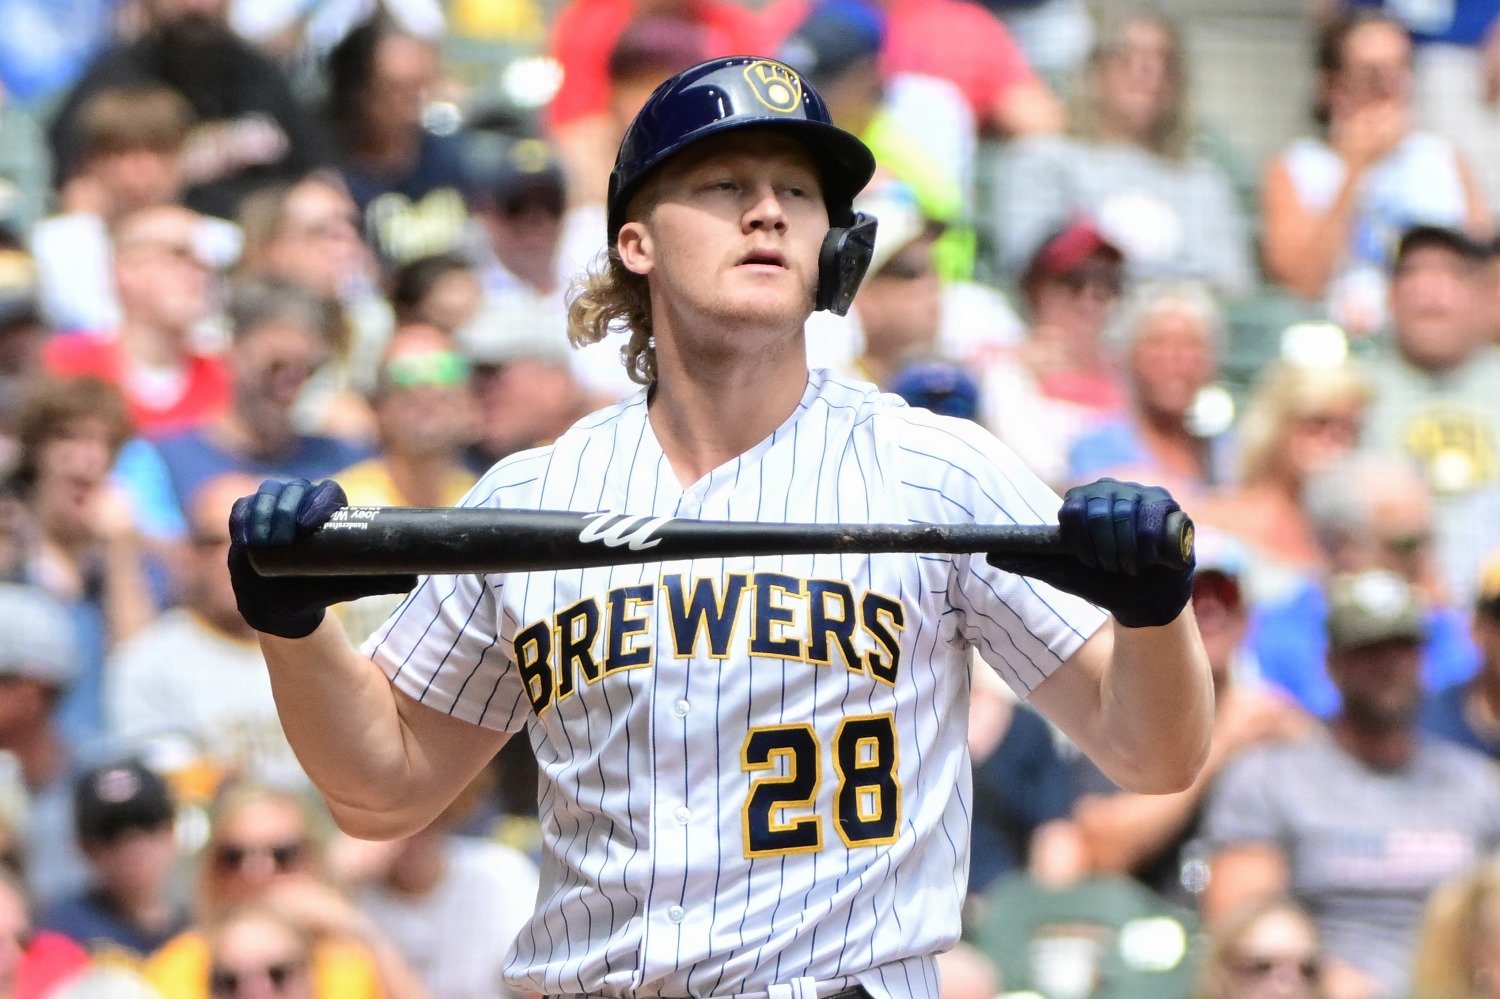 Brewers fix a few bad habits in Willy Adames' swing and now he's